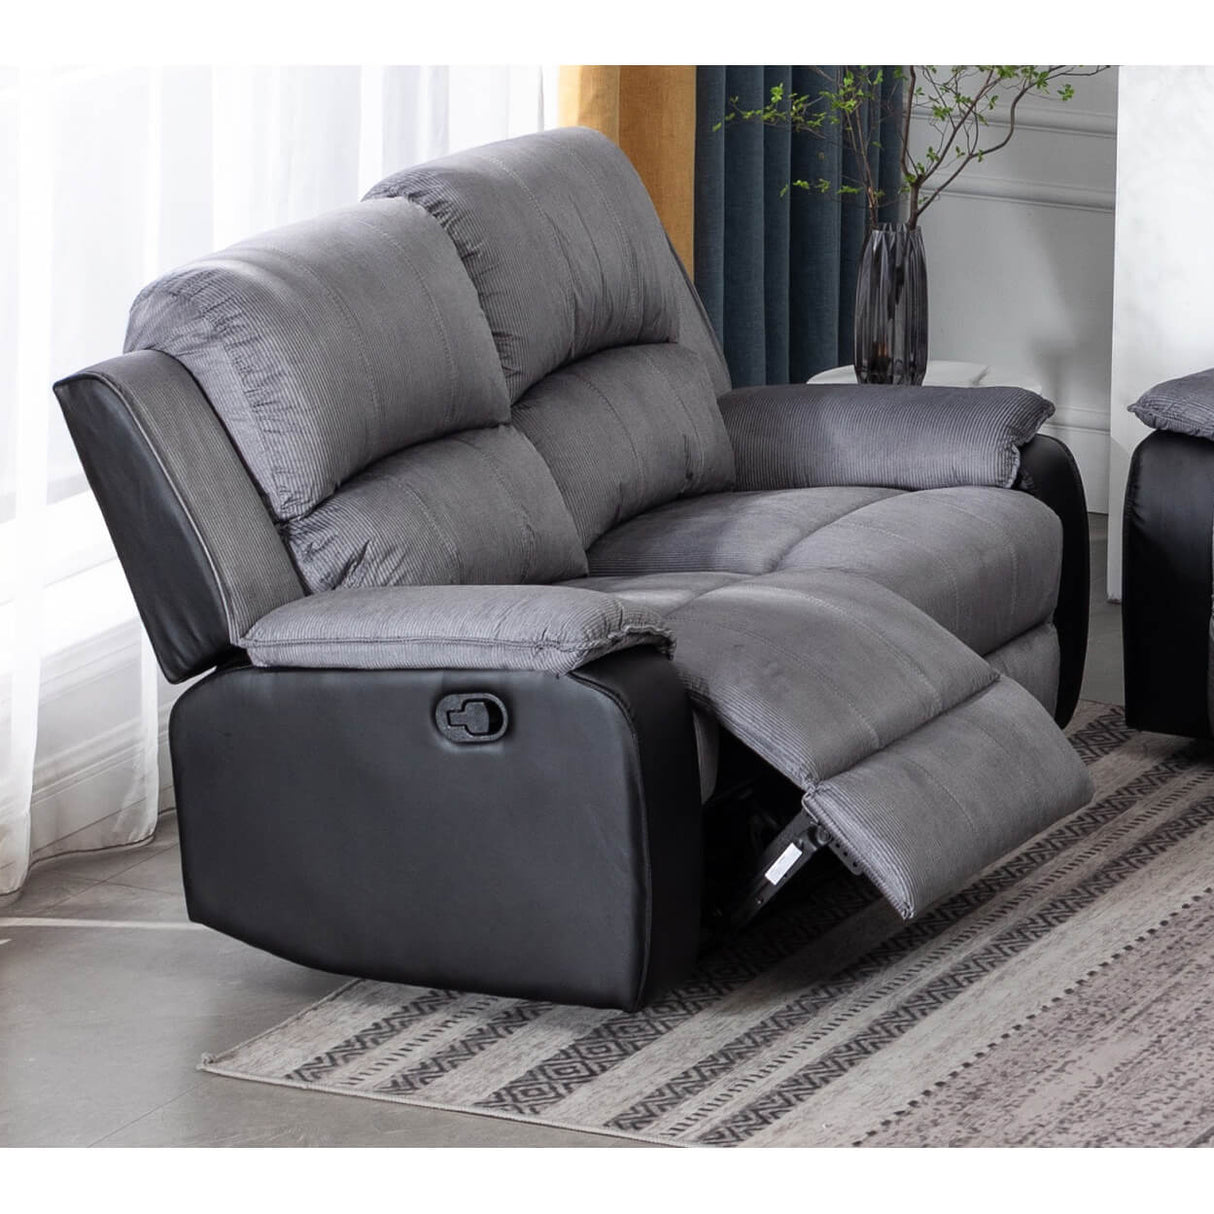 Earlsden Recliner Grey Fabric And Black PU 2 Seater